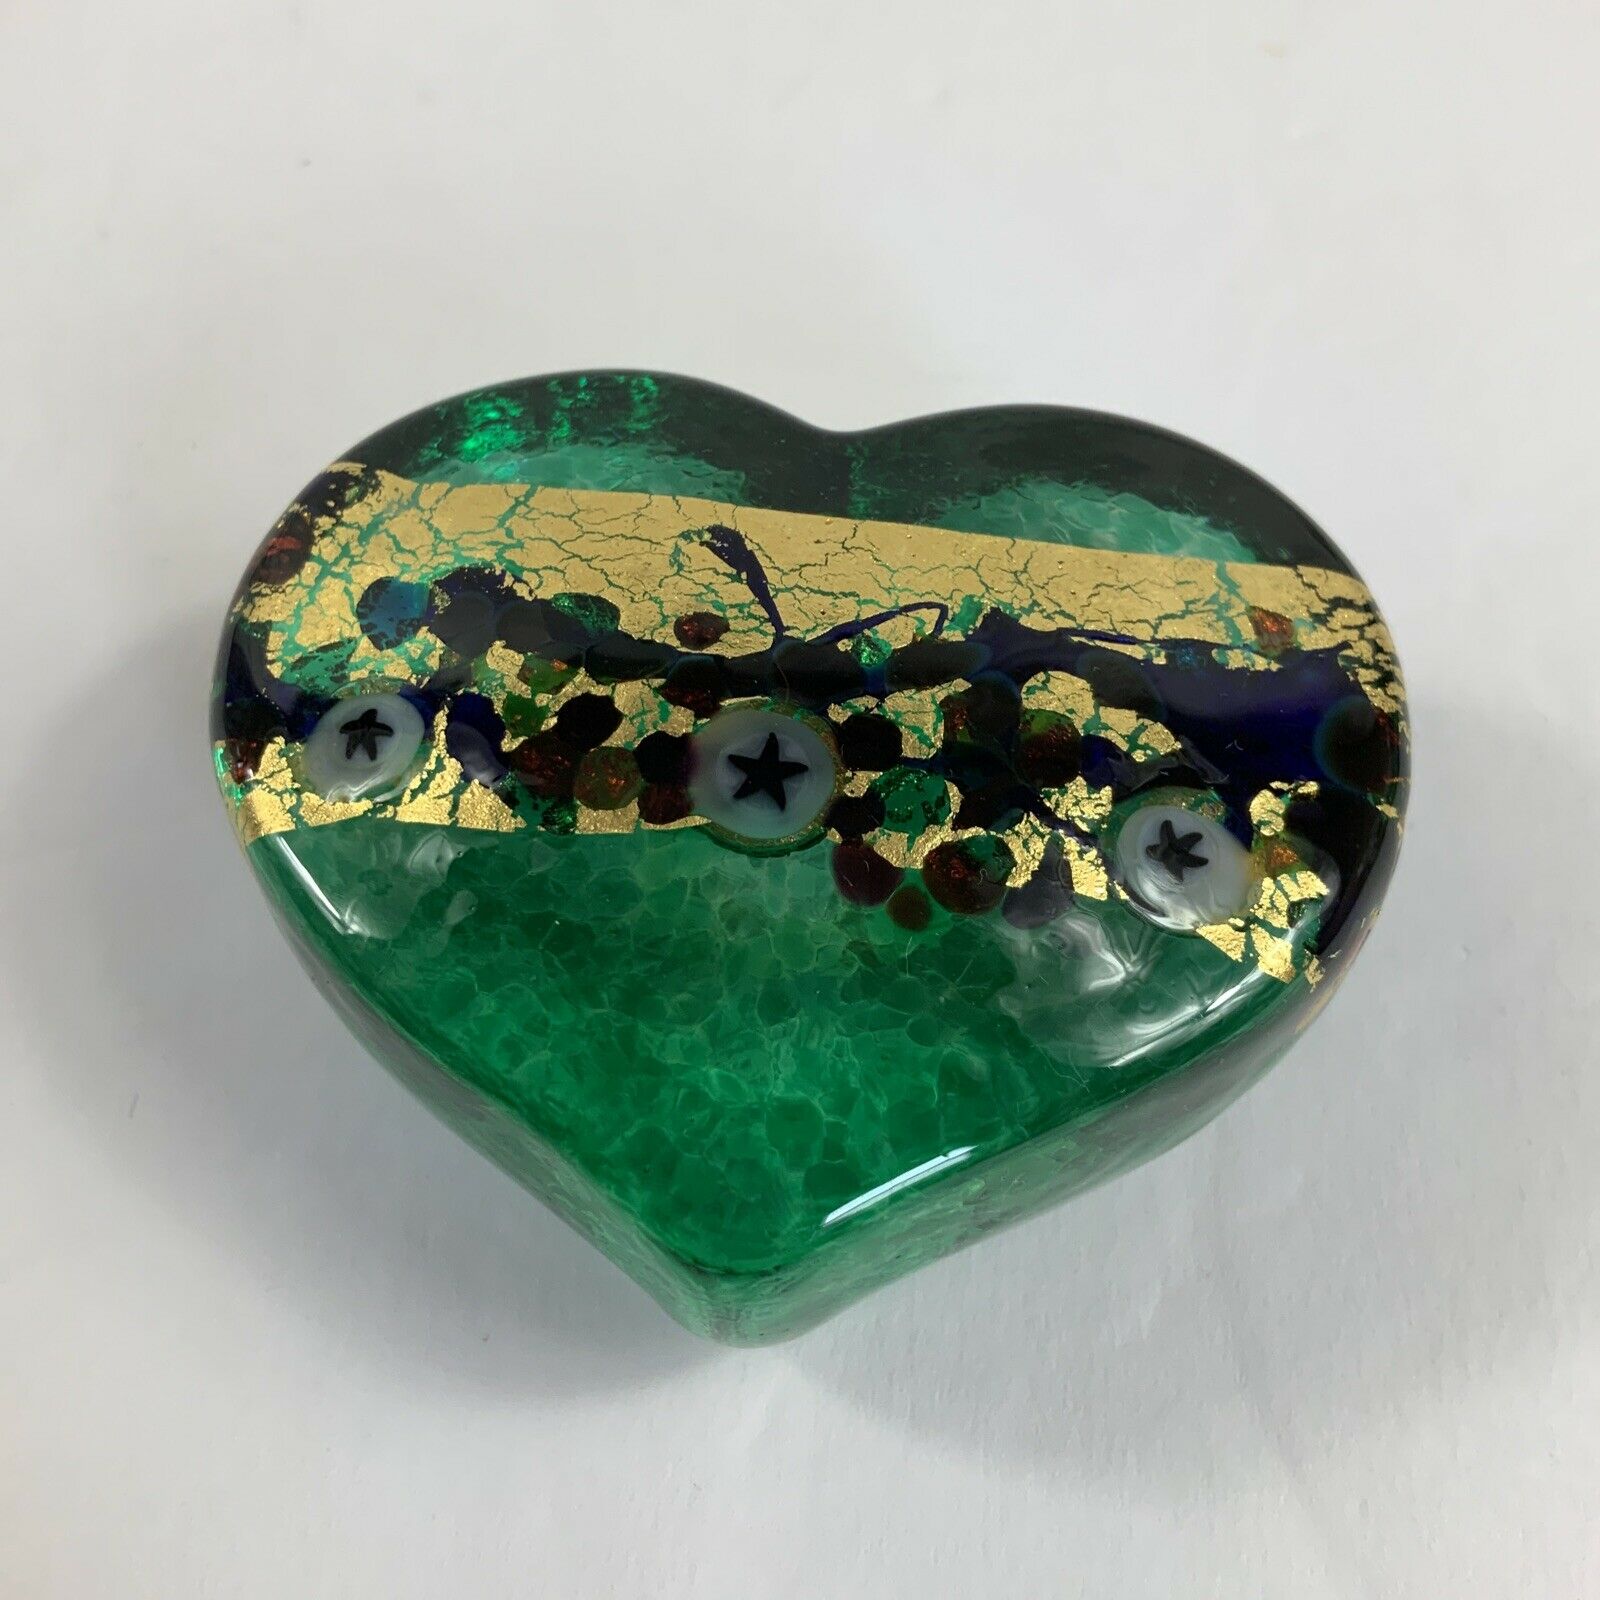 Robert Held Signed Art Glass Heart Shaped Paperweight Green With Gold